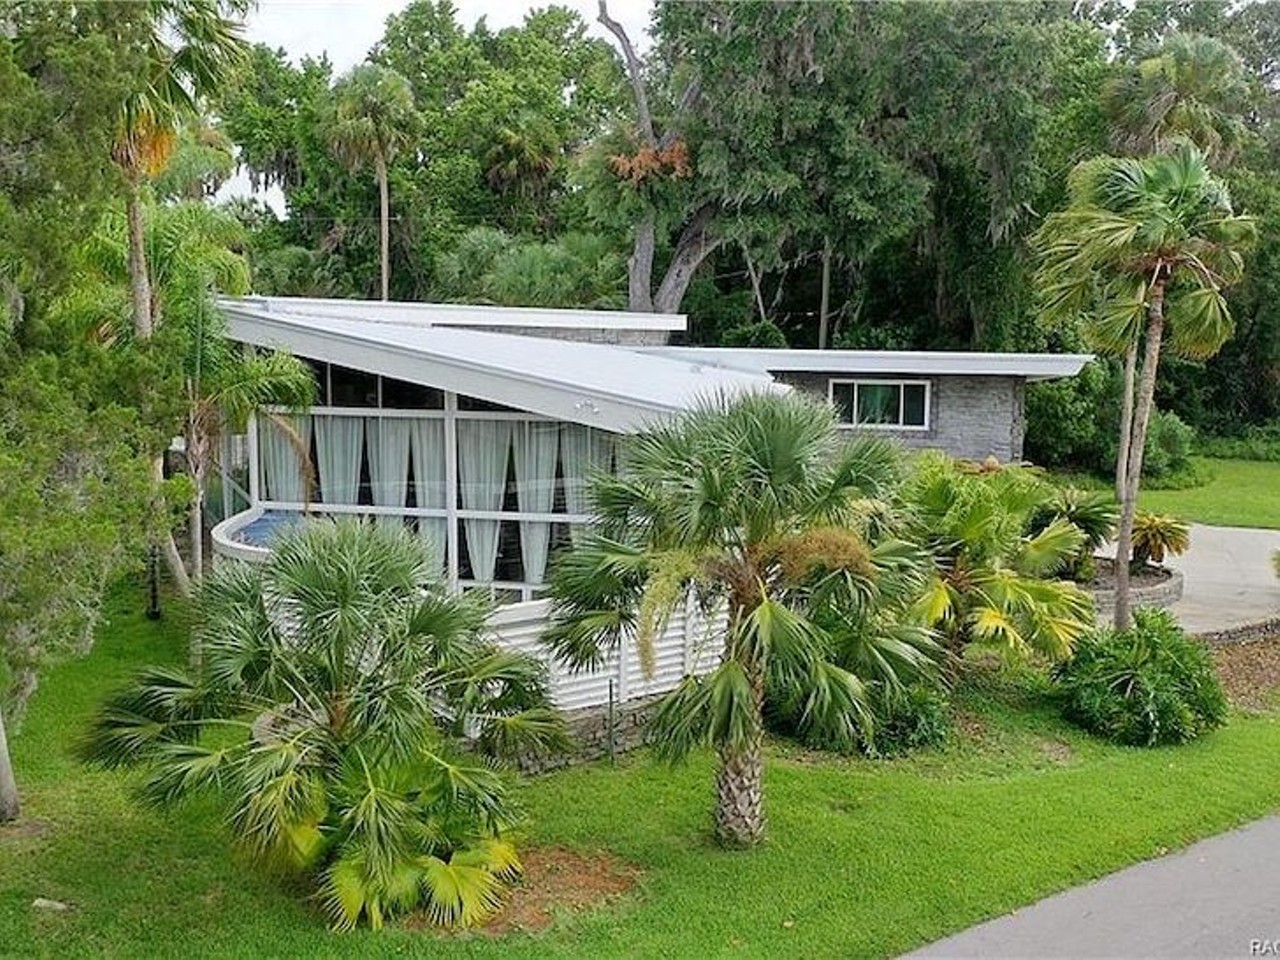 This midcentury &#145;bird cage house&#146; is now for sale in Tampa Bay